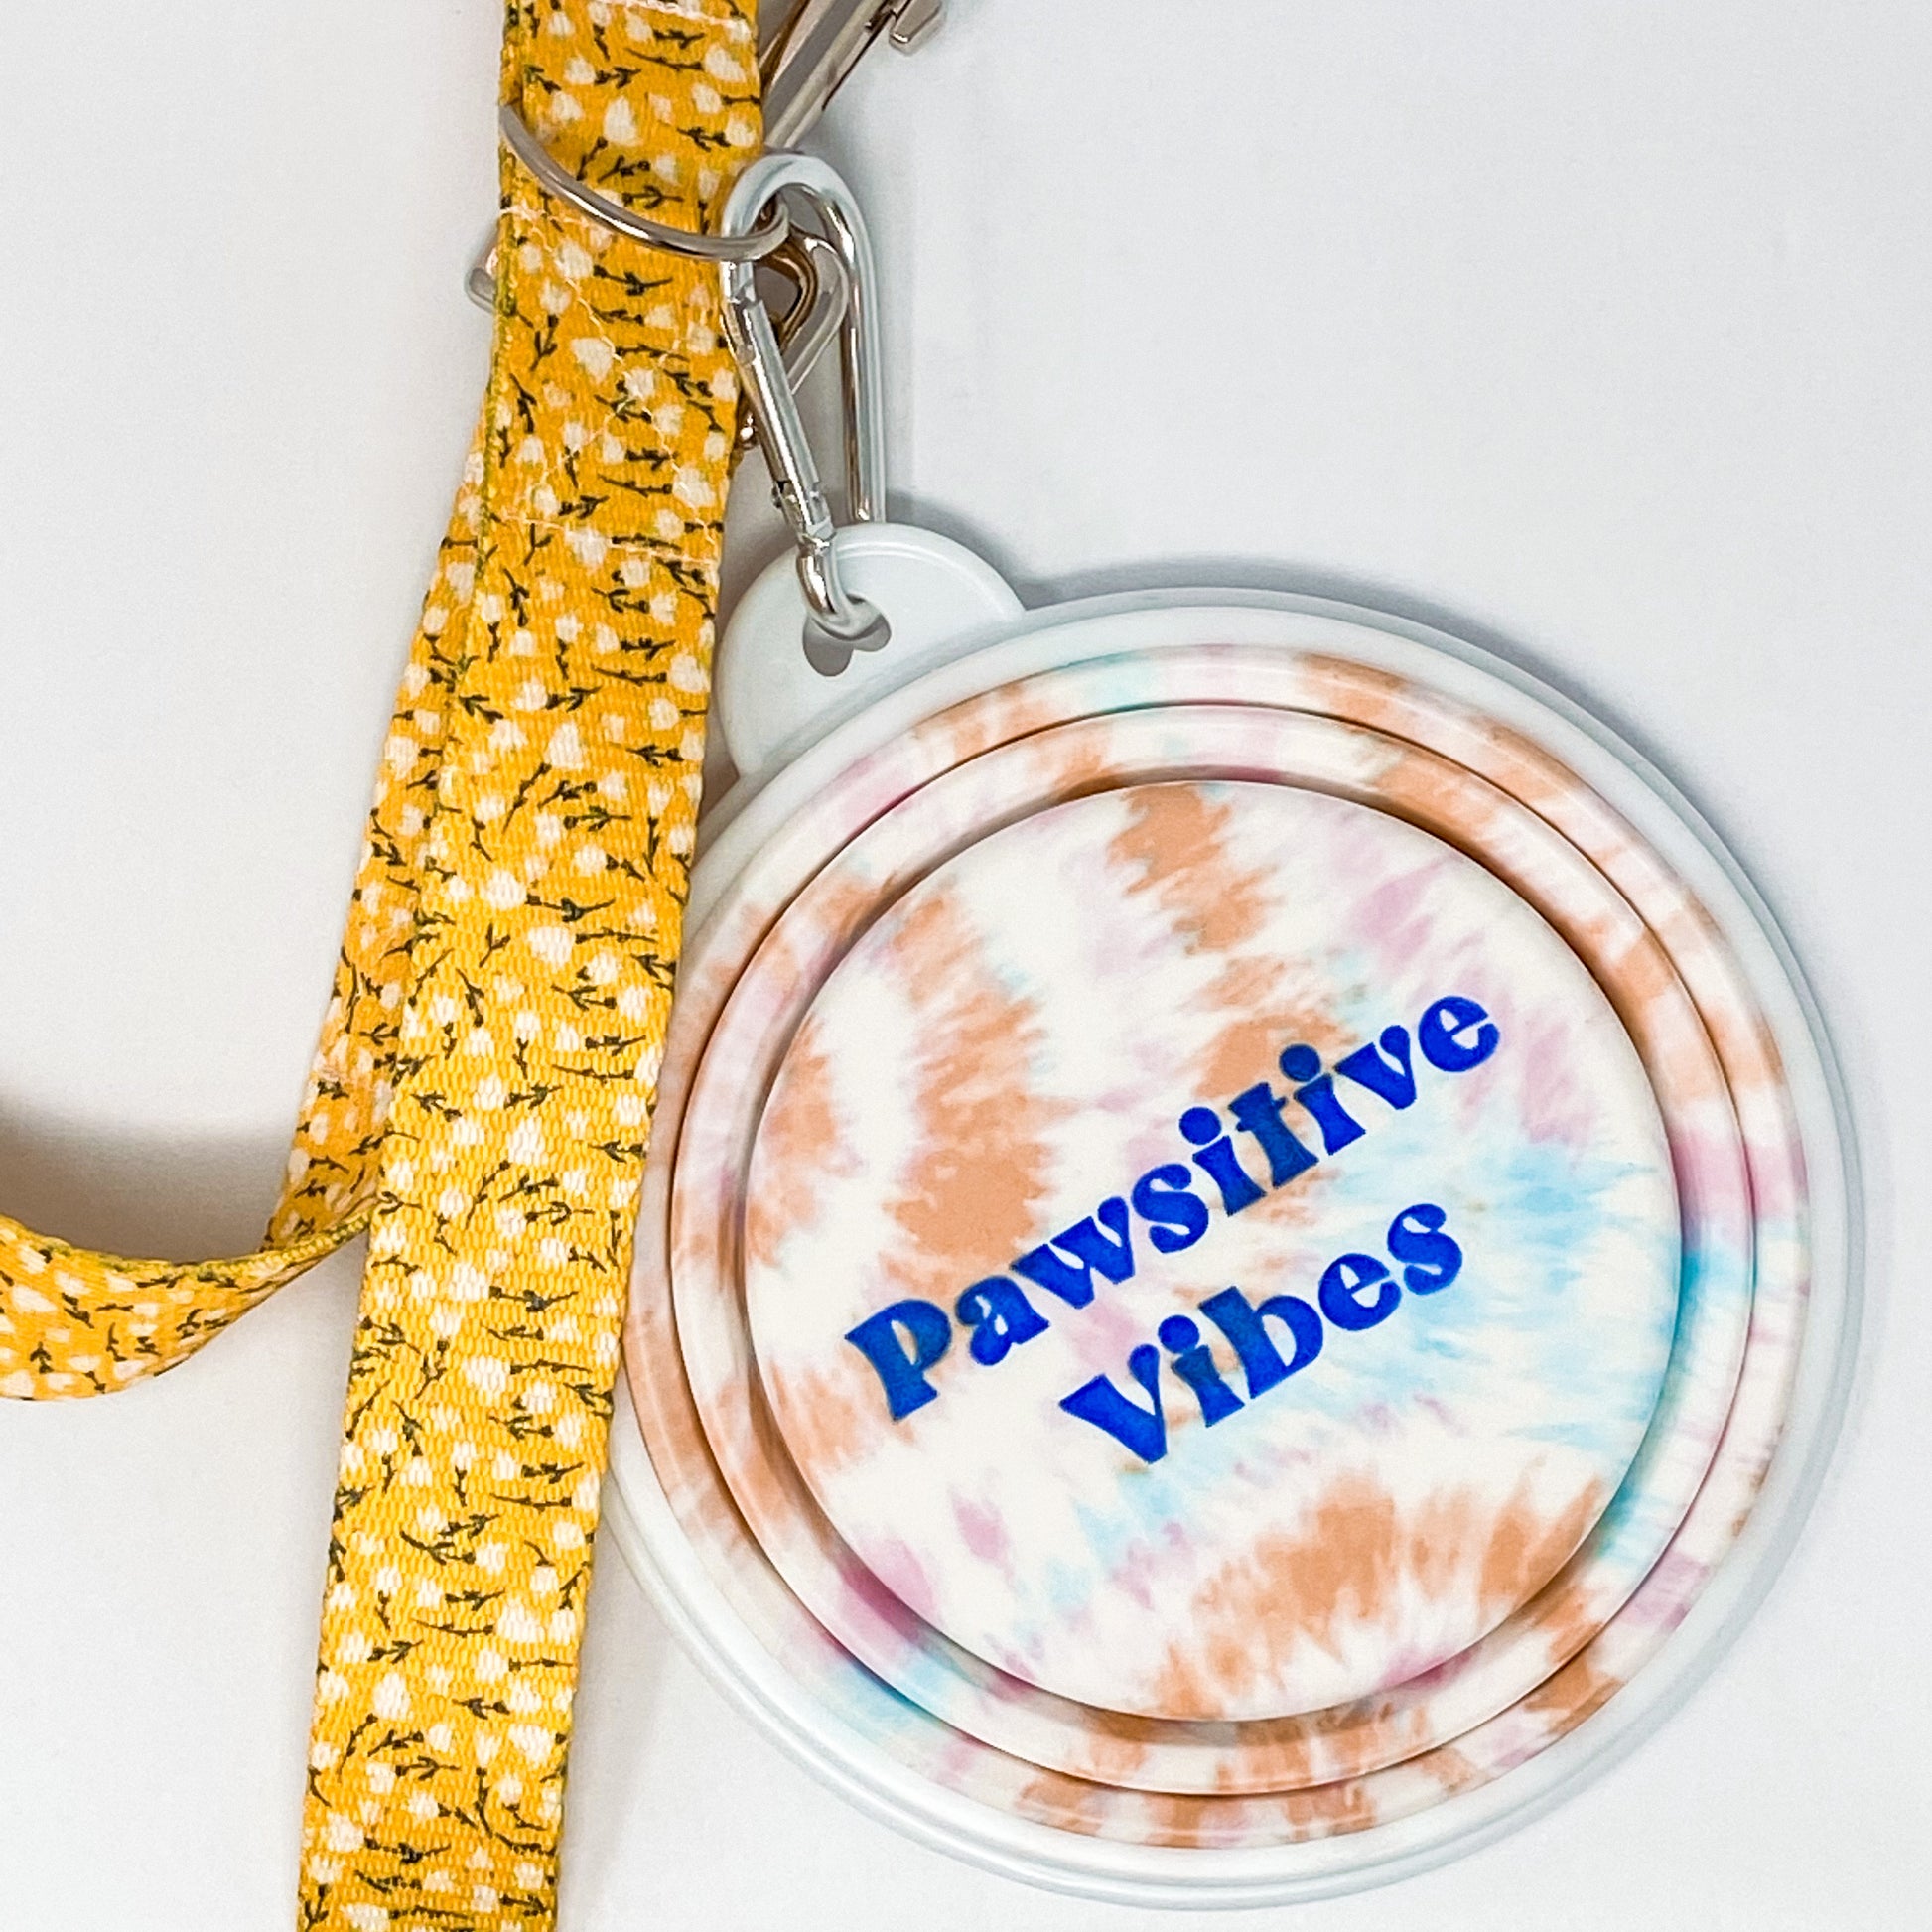 Pawsitive vibes tie dye collapsible travel dog bowl